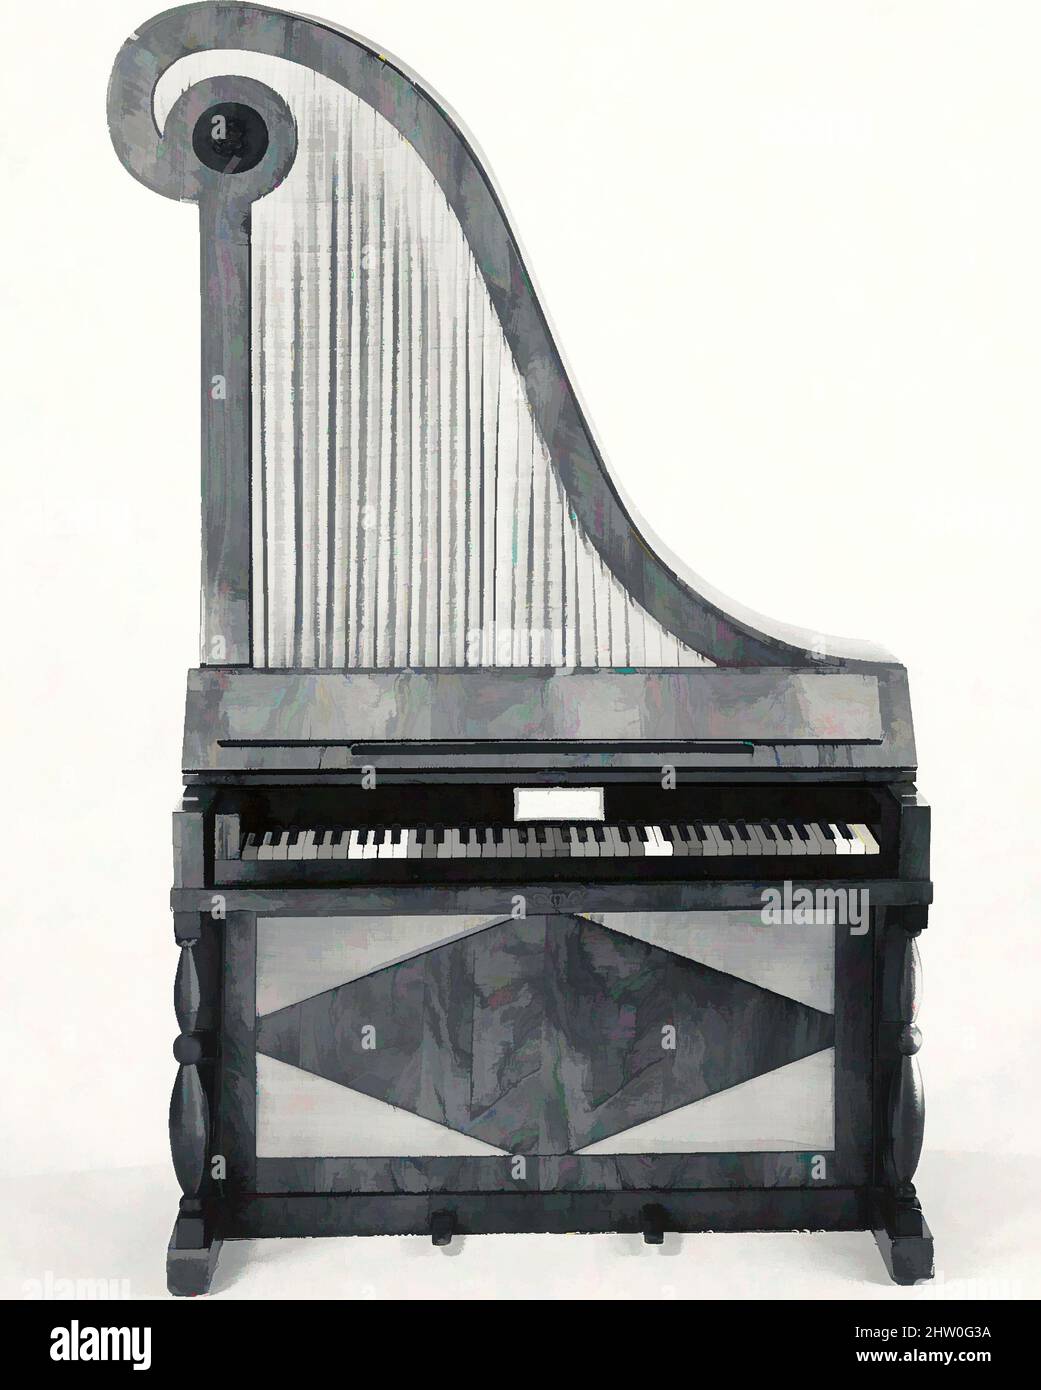 Art inspired by Upright (Giraffe) Piano, 1810, Austria, Austrian, Wood, various materials, Case L. (perpendicular to keyboard): 55.3 cm (21-7/8 in.; W. parallel to keyboard): 115.8 cm (45-5/8 in.);H.: 199.5 cm (78-5/8 in.); 3-octave span: 47.7 cm (18-7/8 in.); Vibrating string L, Classic works modernized by Artotop with a splash of modernity. Shapes, color and value, eye-catching visual impact on art. Emotions through freedom of artworks in a contemporary way. A timeless message pursuing a wildly creative new direction. Artists turning to the digital medium and creating the Artotop NFT Stock Photo